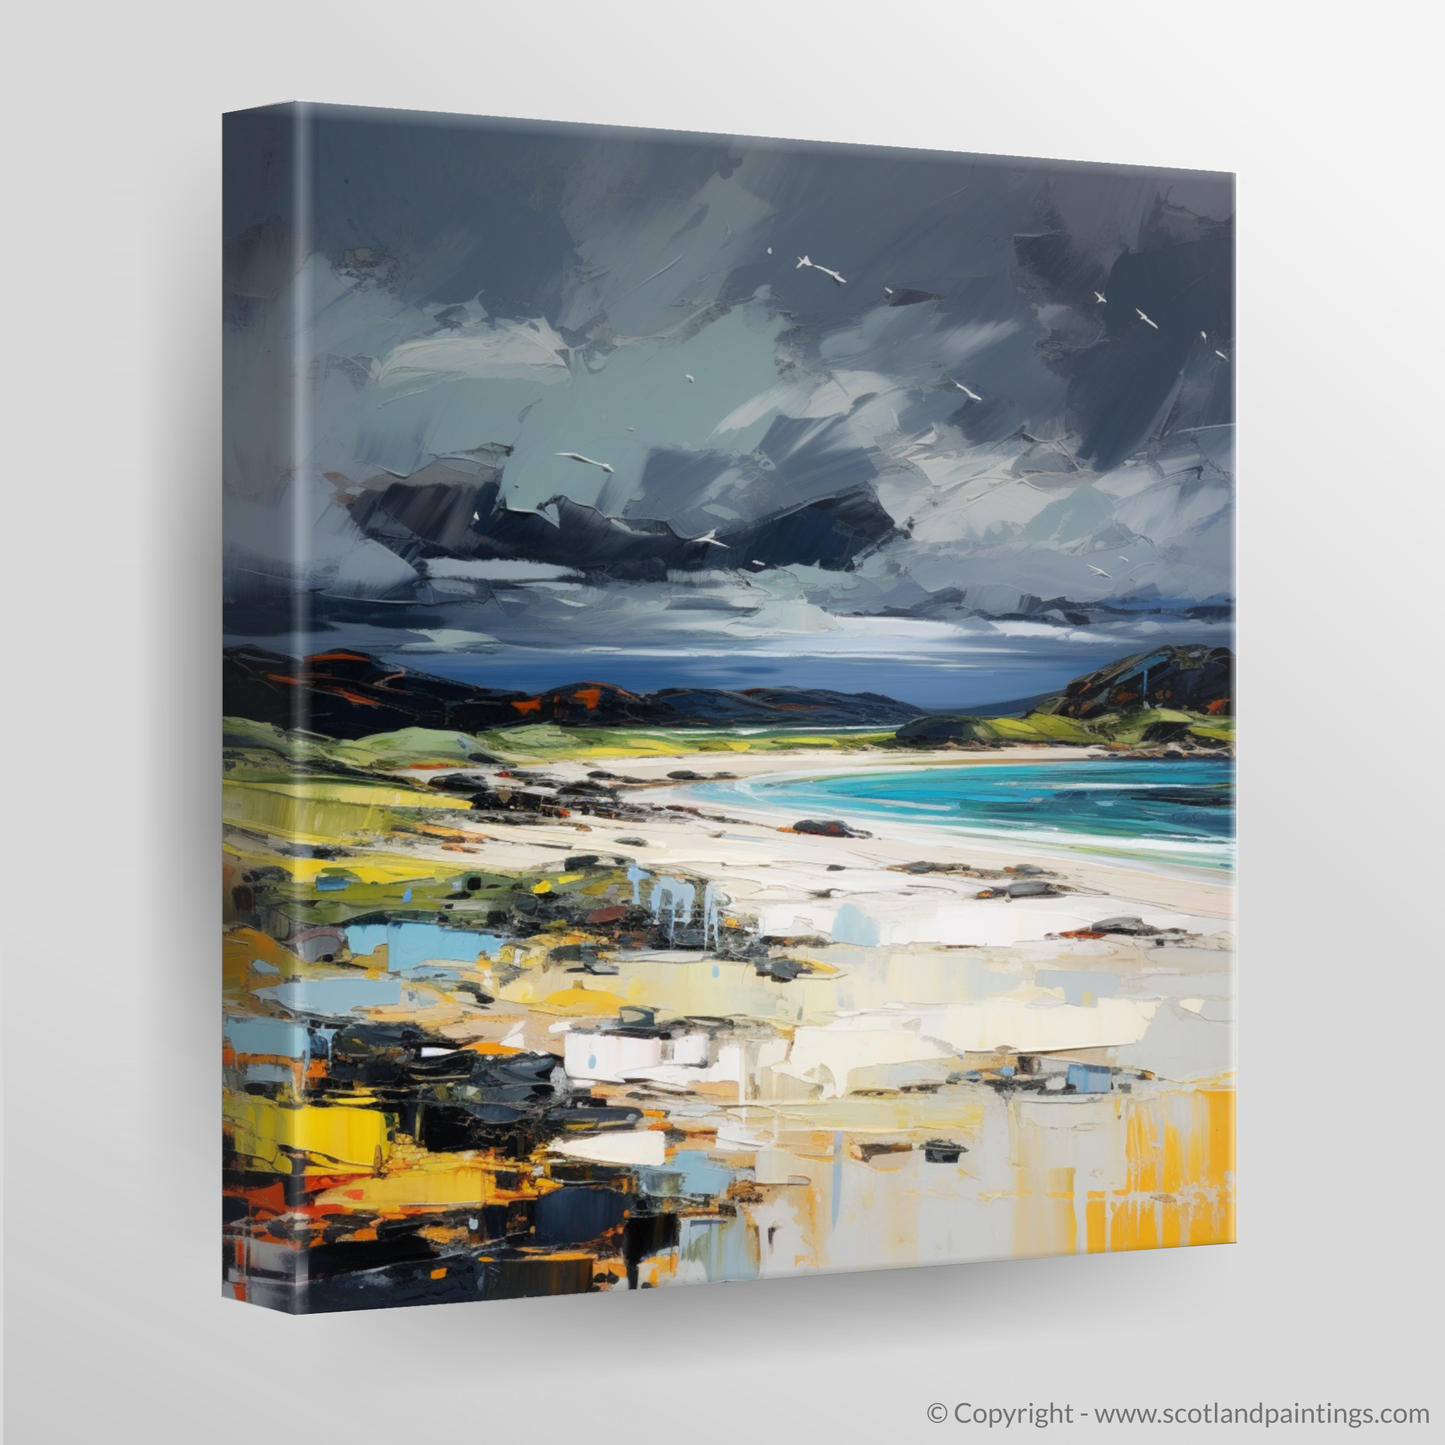 Canvas Print of Arisaig Beach with a stormy sky